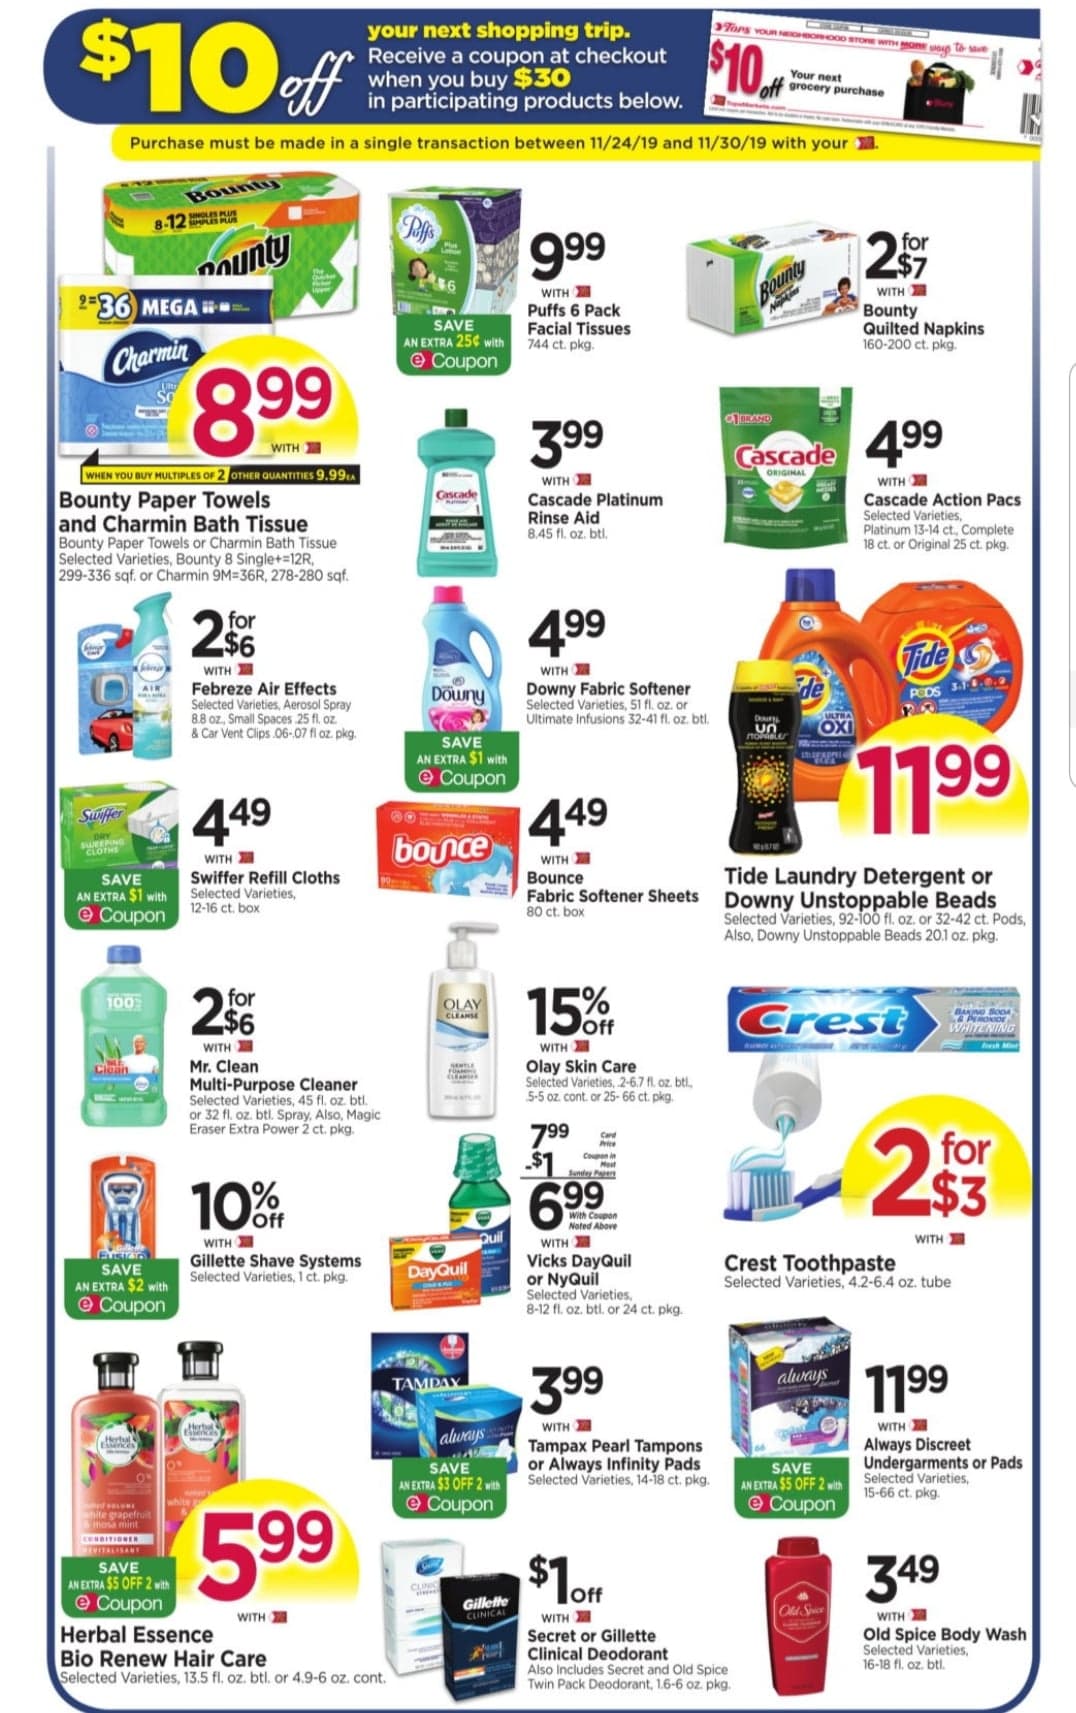 $10 off tops coupon